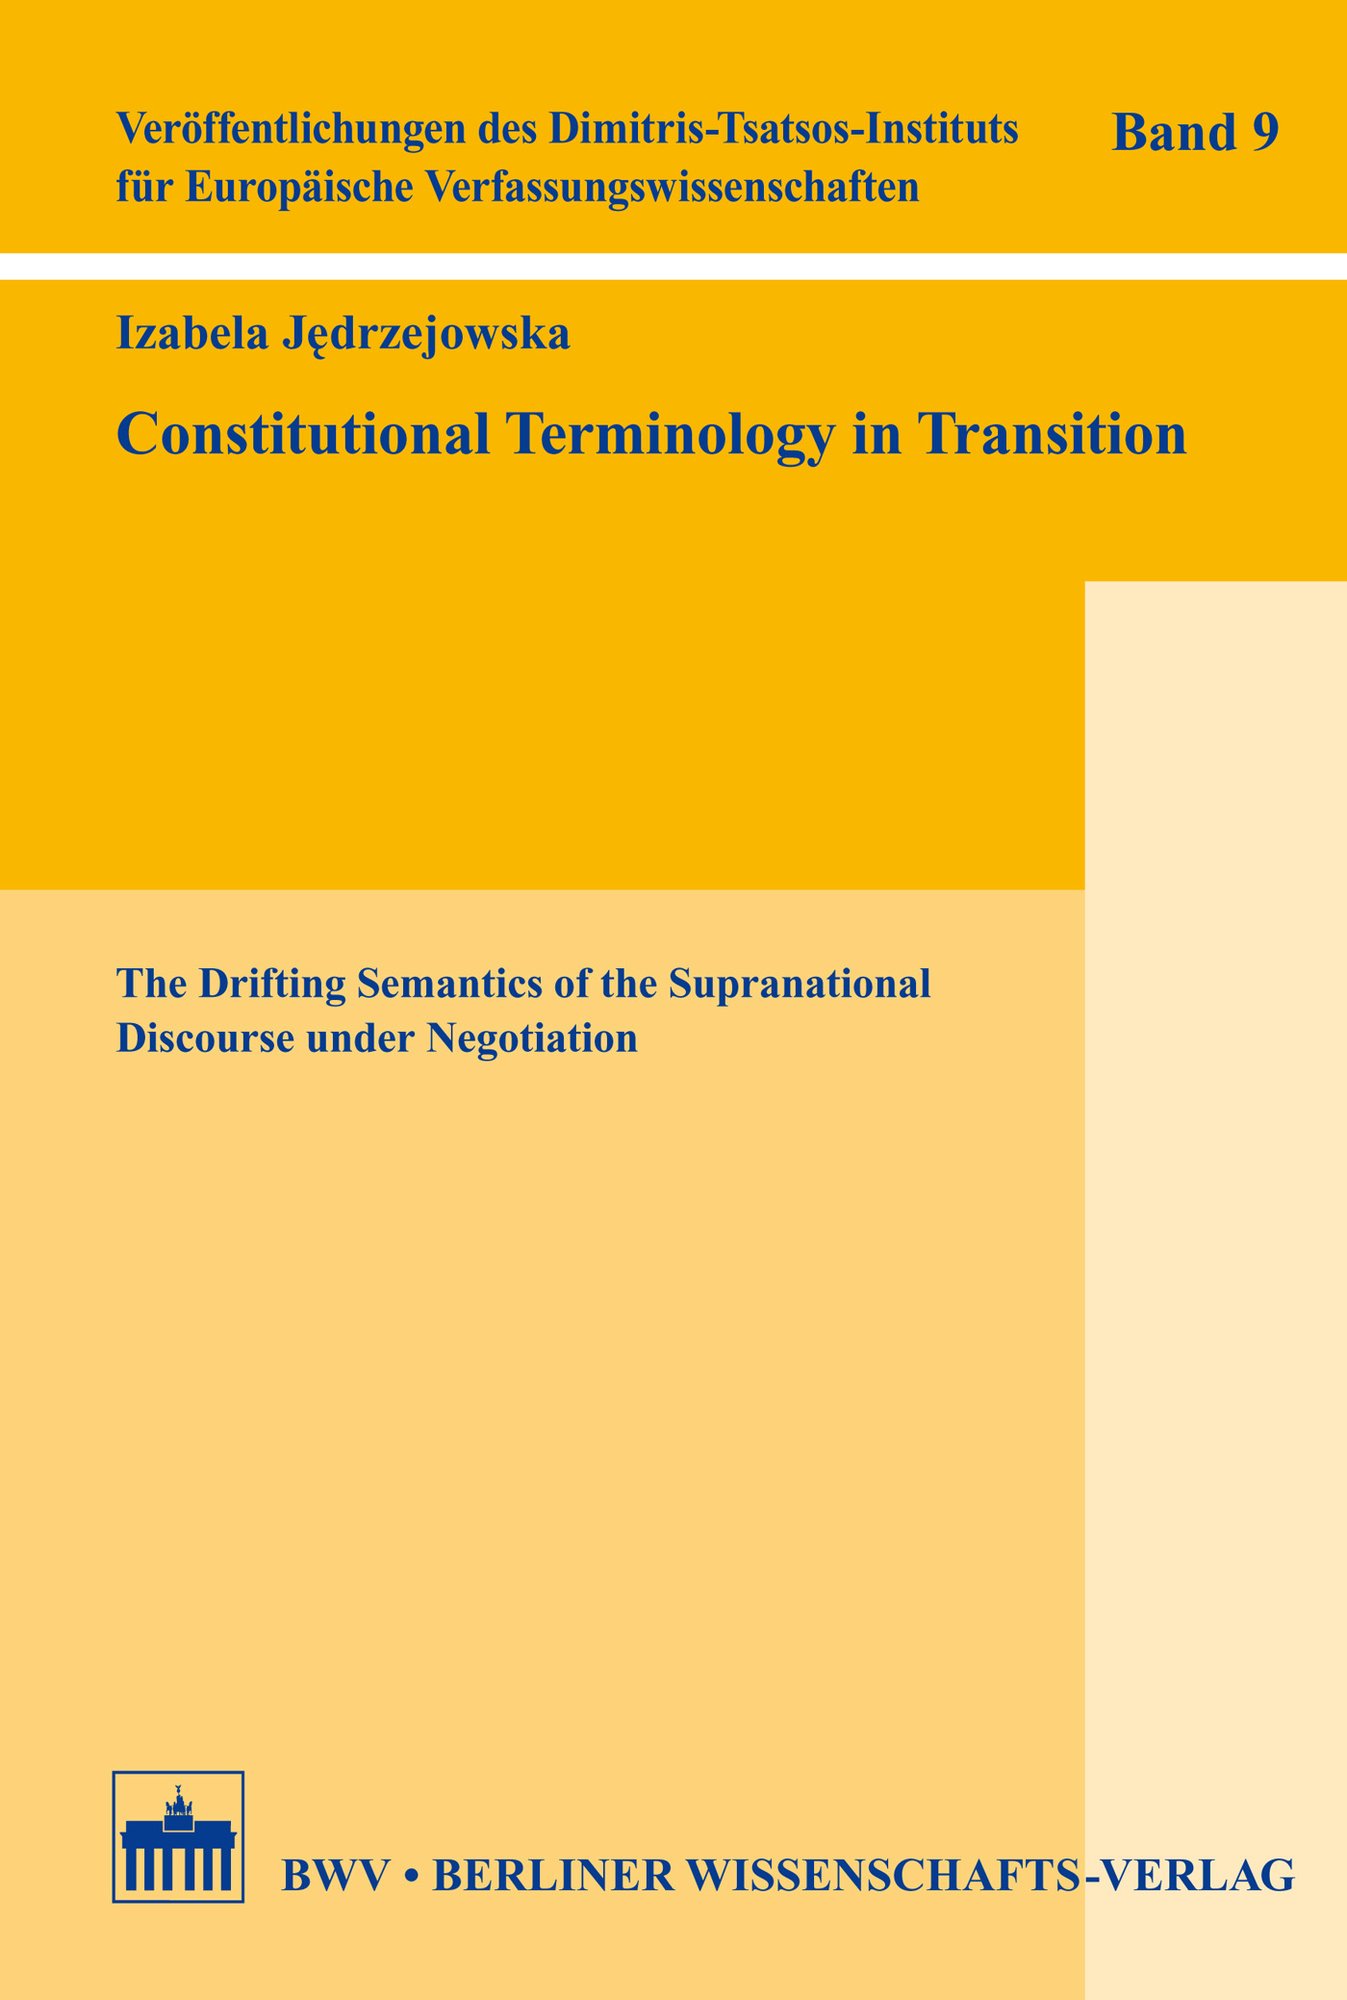 Constitutional Terminology in Transition